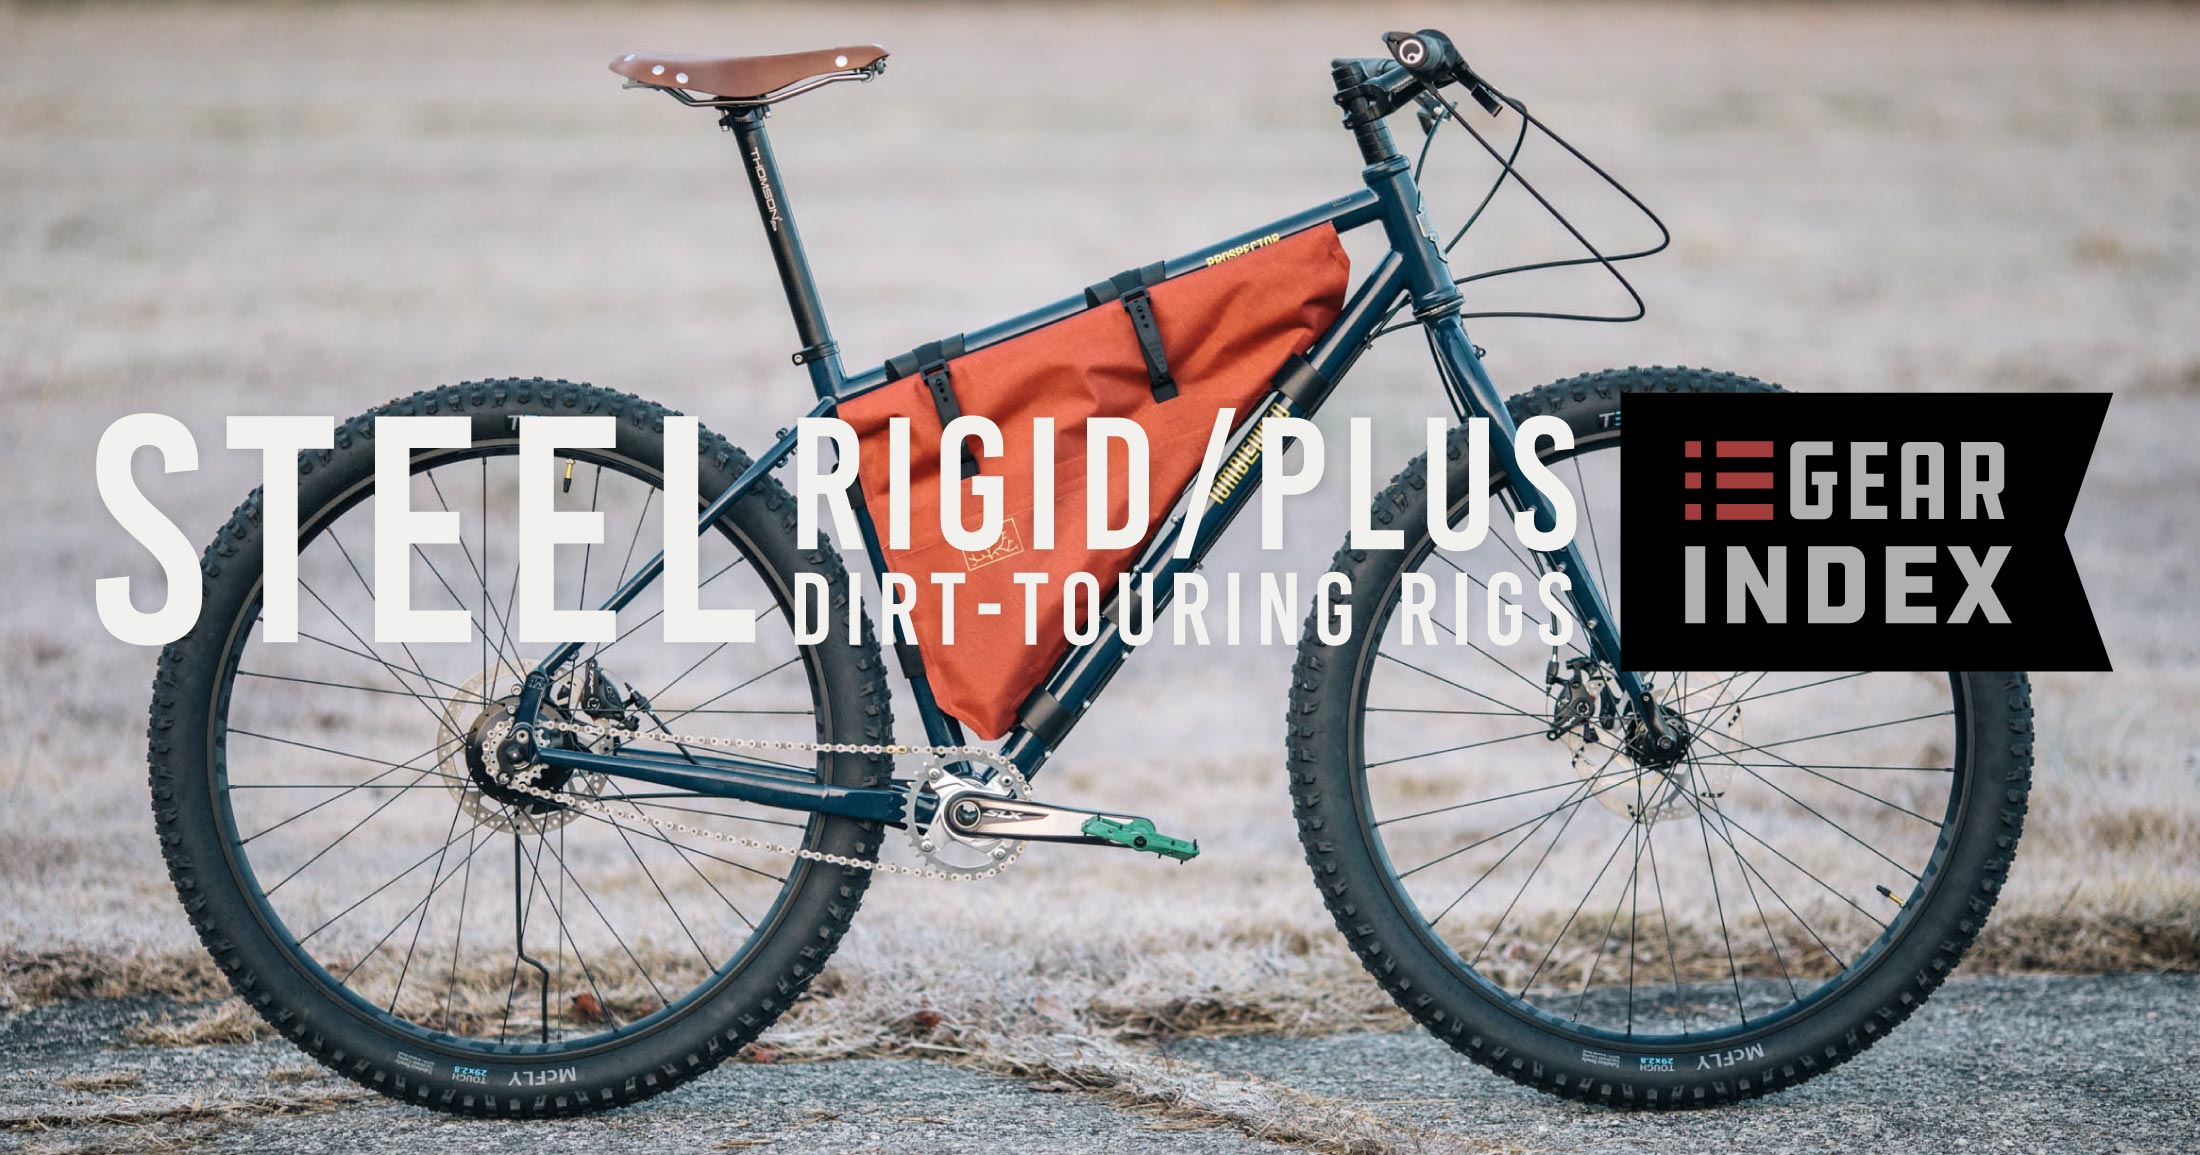 6. Matching the bike to the type of bikepacking tour